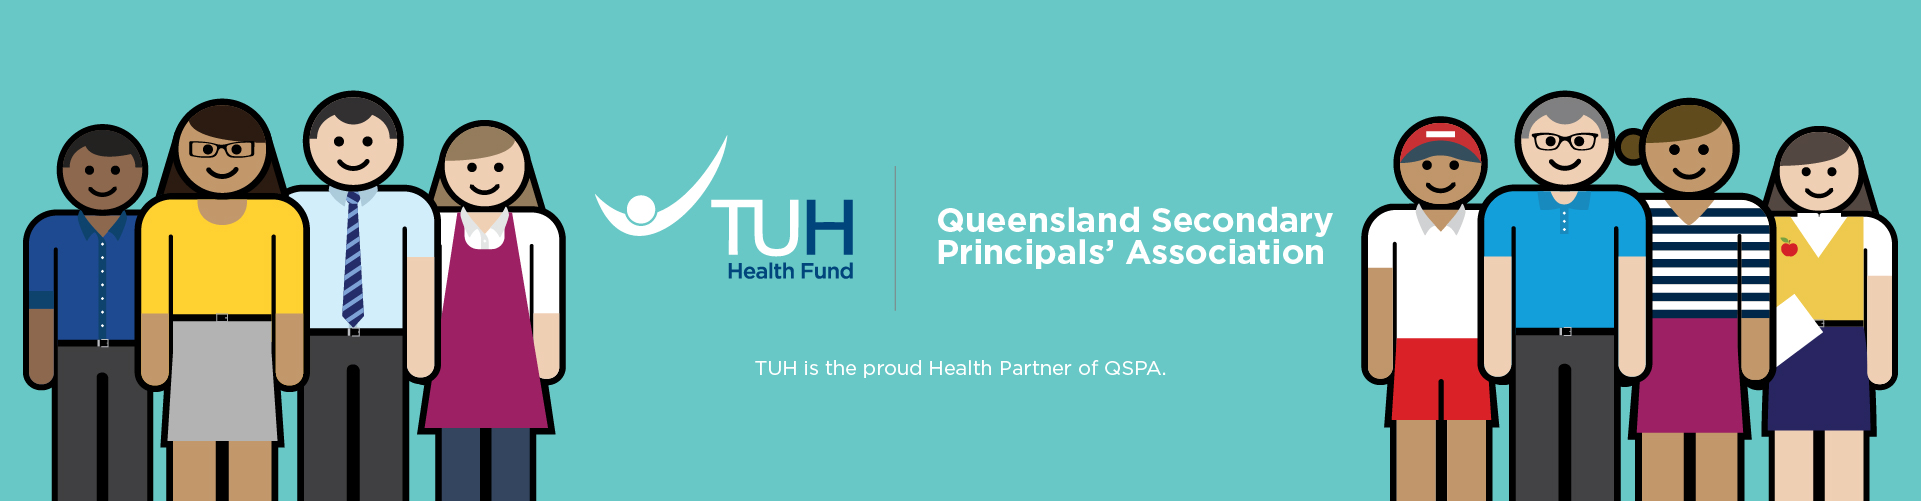 TUH health fund and queensland secondary principals' association logo banner